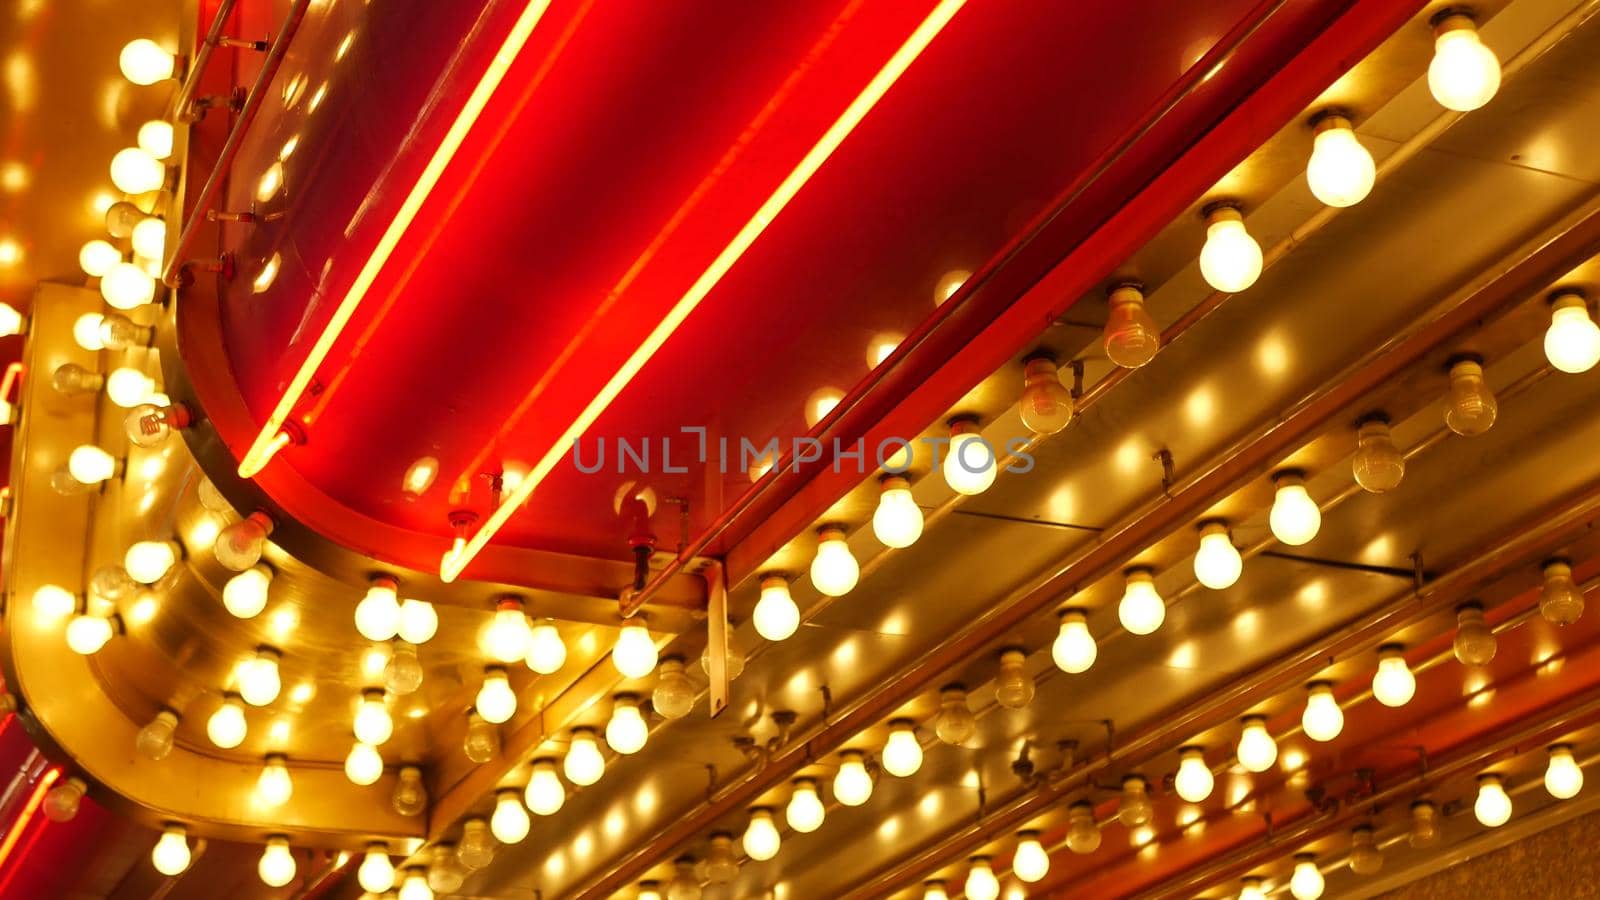 Old fasioned electric lamps blinking and glowing at night. Abstract close up of retro casino decoration shimmering in Las Vegas, USA. Illuminated vintage style bulbs glittering on Freemont street.